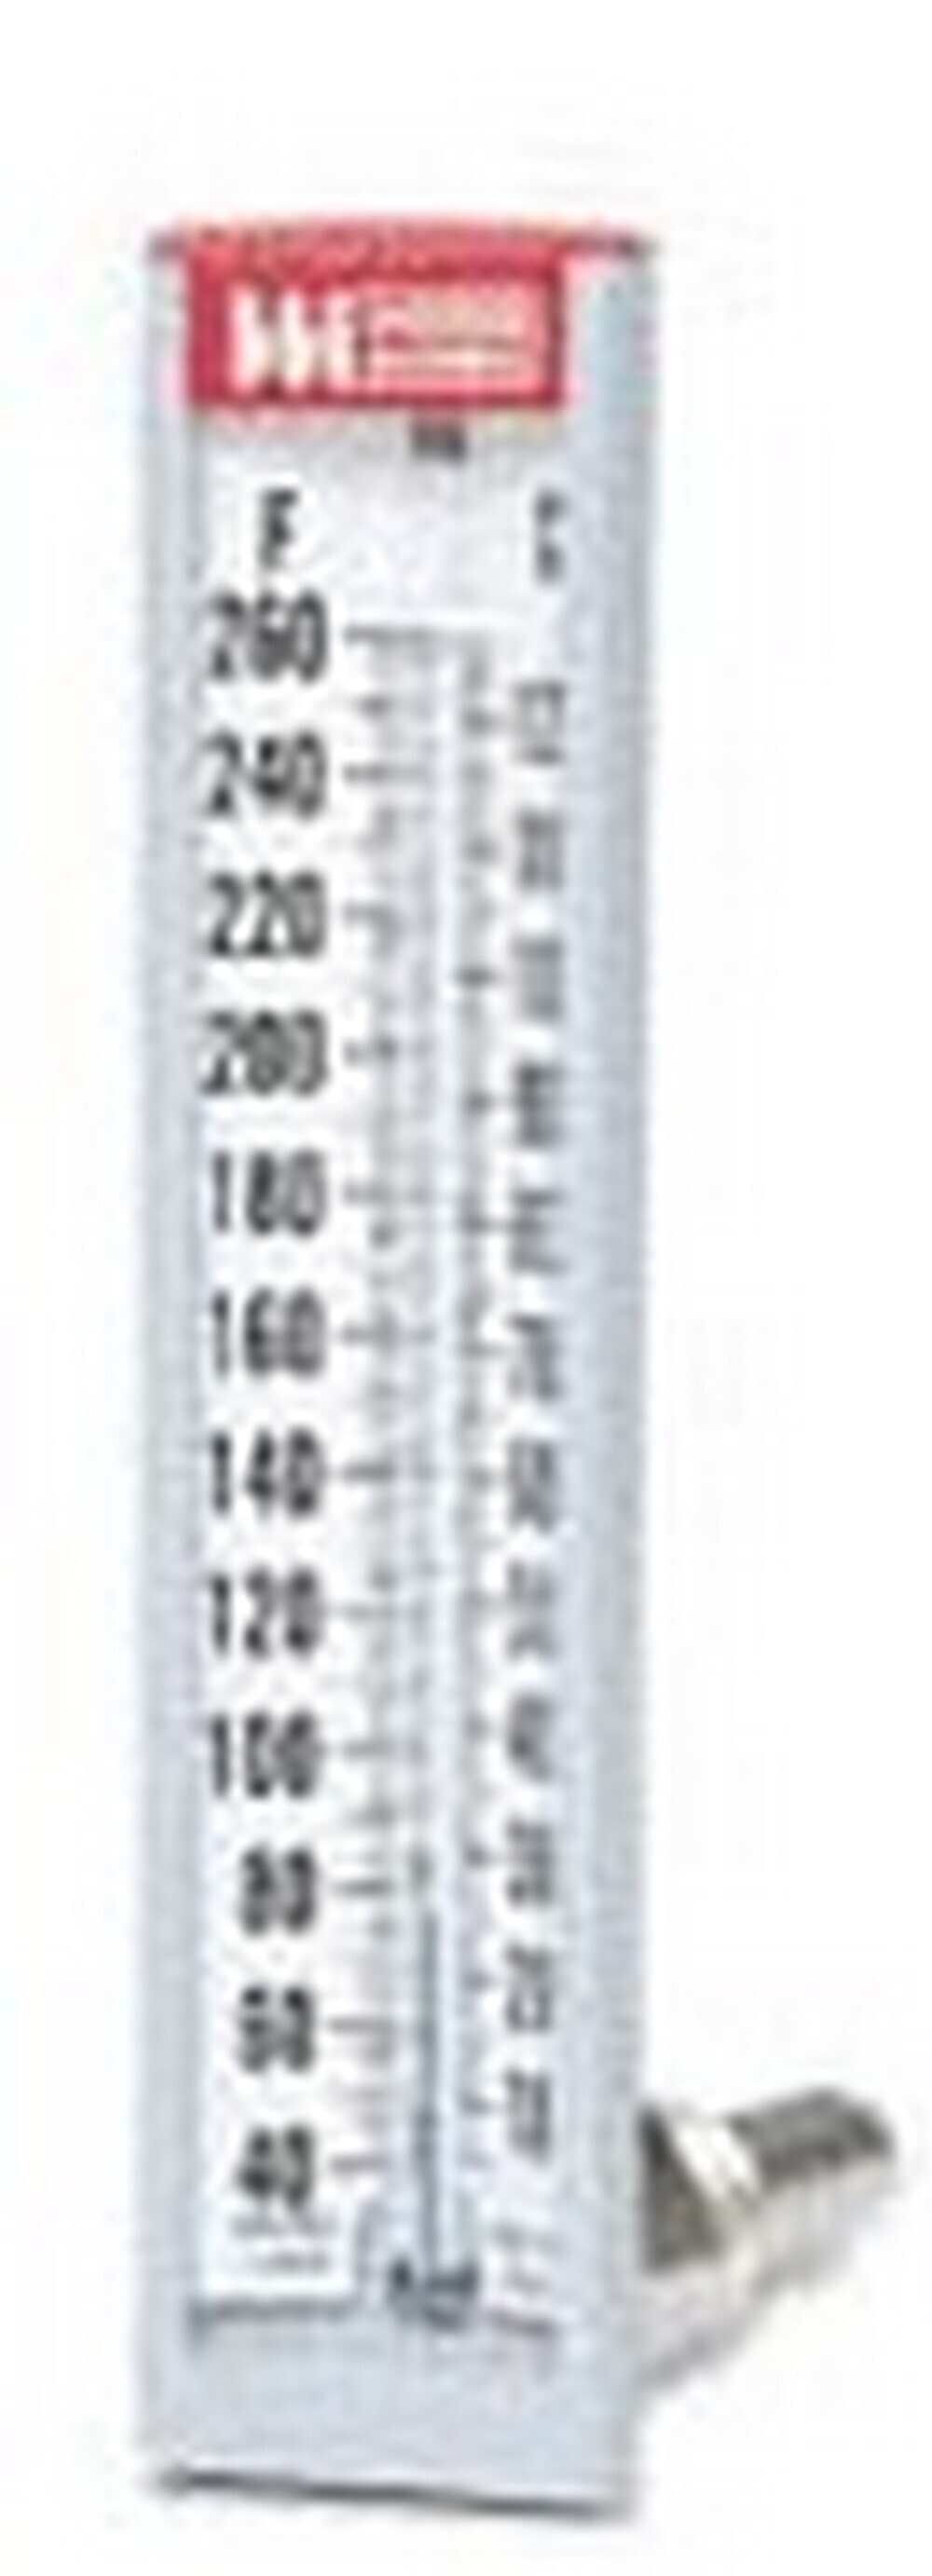 HW5A2 - Weiss Instruments HW5A2 - Thermometers